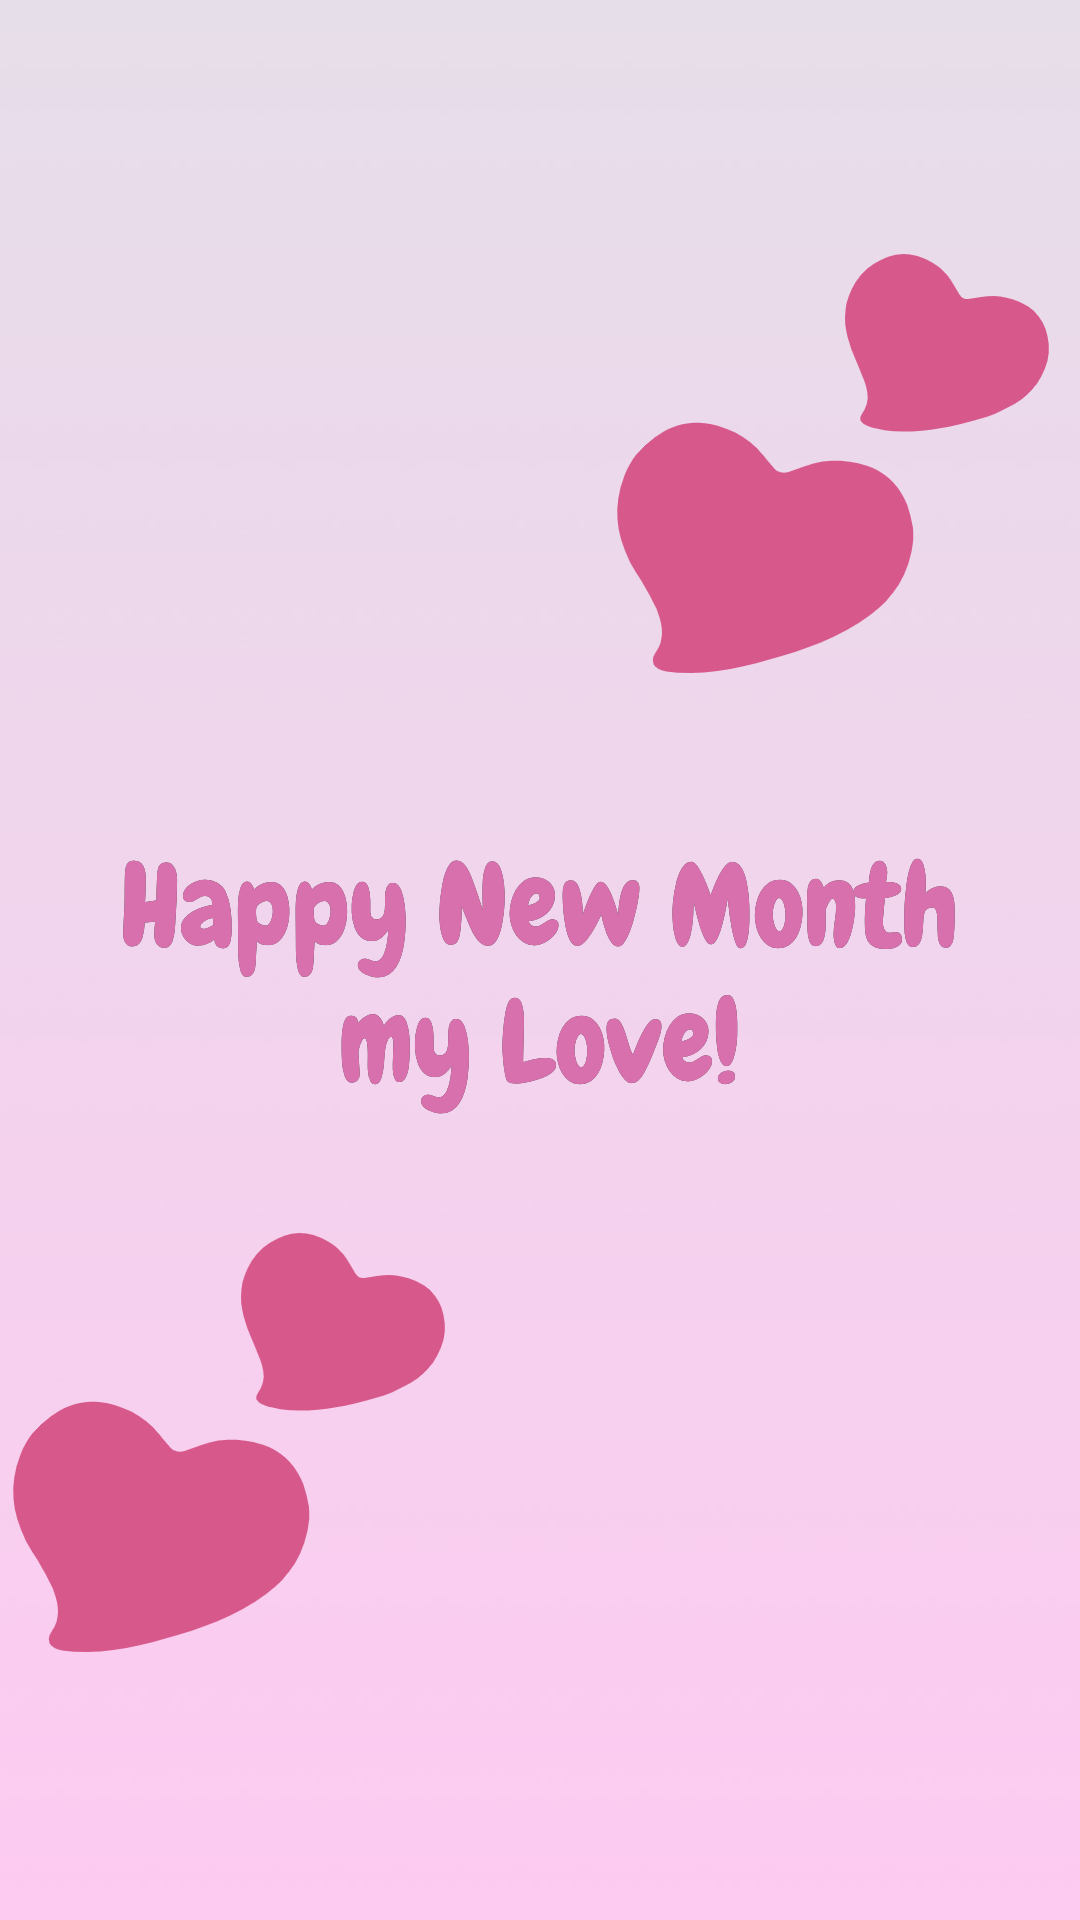 Charming Happy New Month Text Messages And Wishes For May 2020